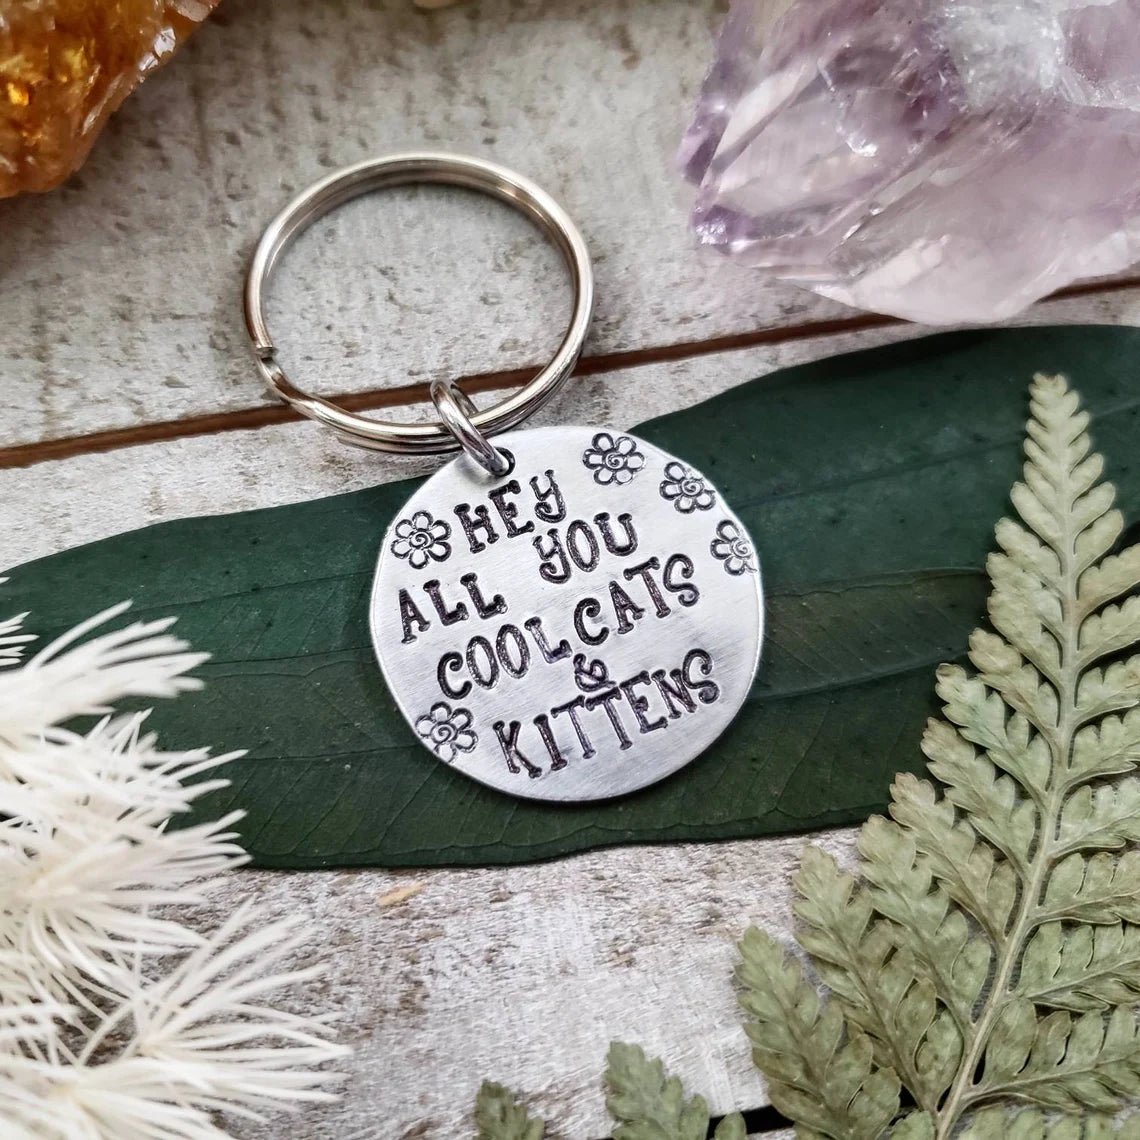 Hey all you cool cats and kittens Keychain